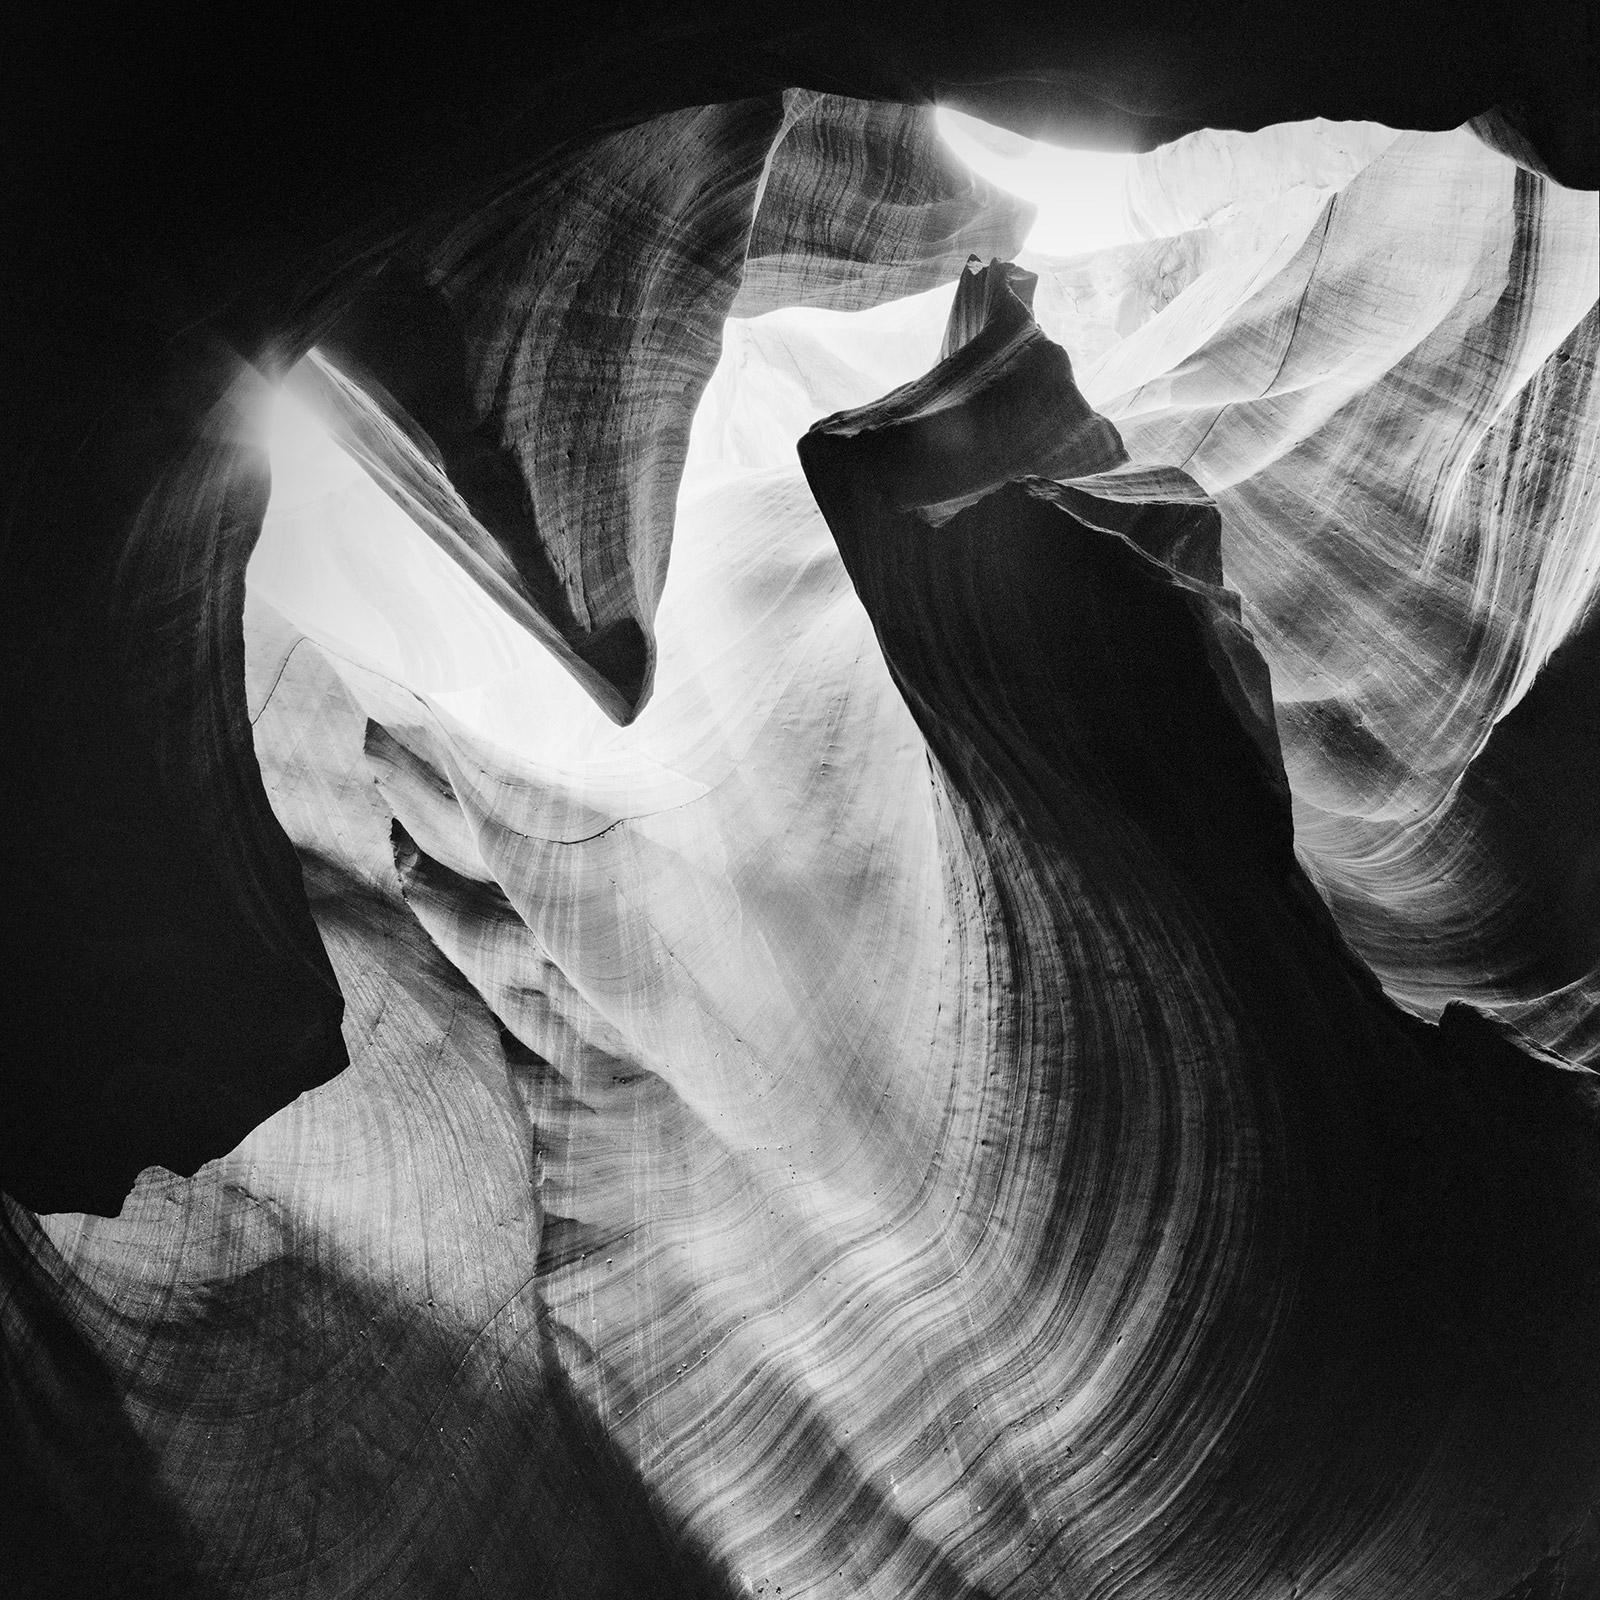 Gerald Berghammer Black and White Photograph - Antelope Canyon rock formation USA black white abstract photography landscape